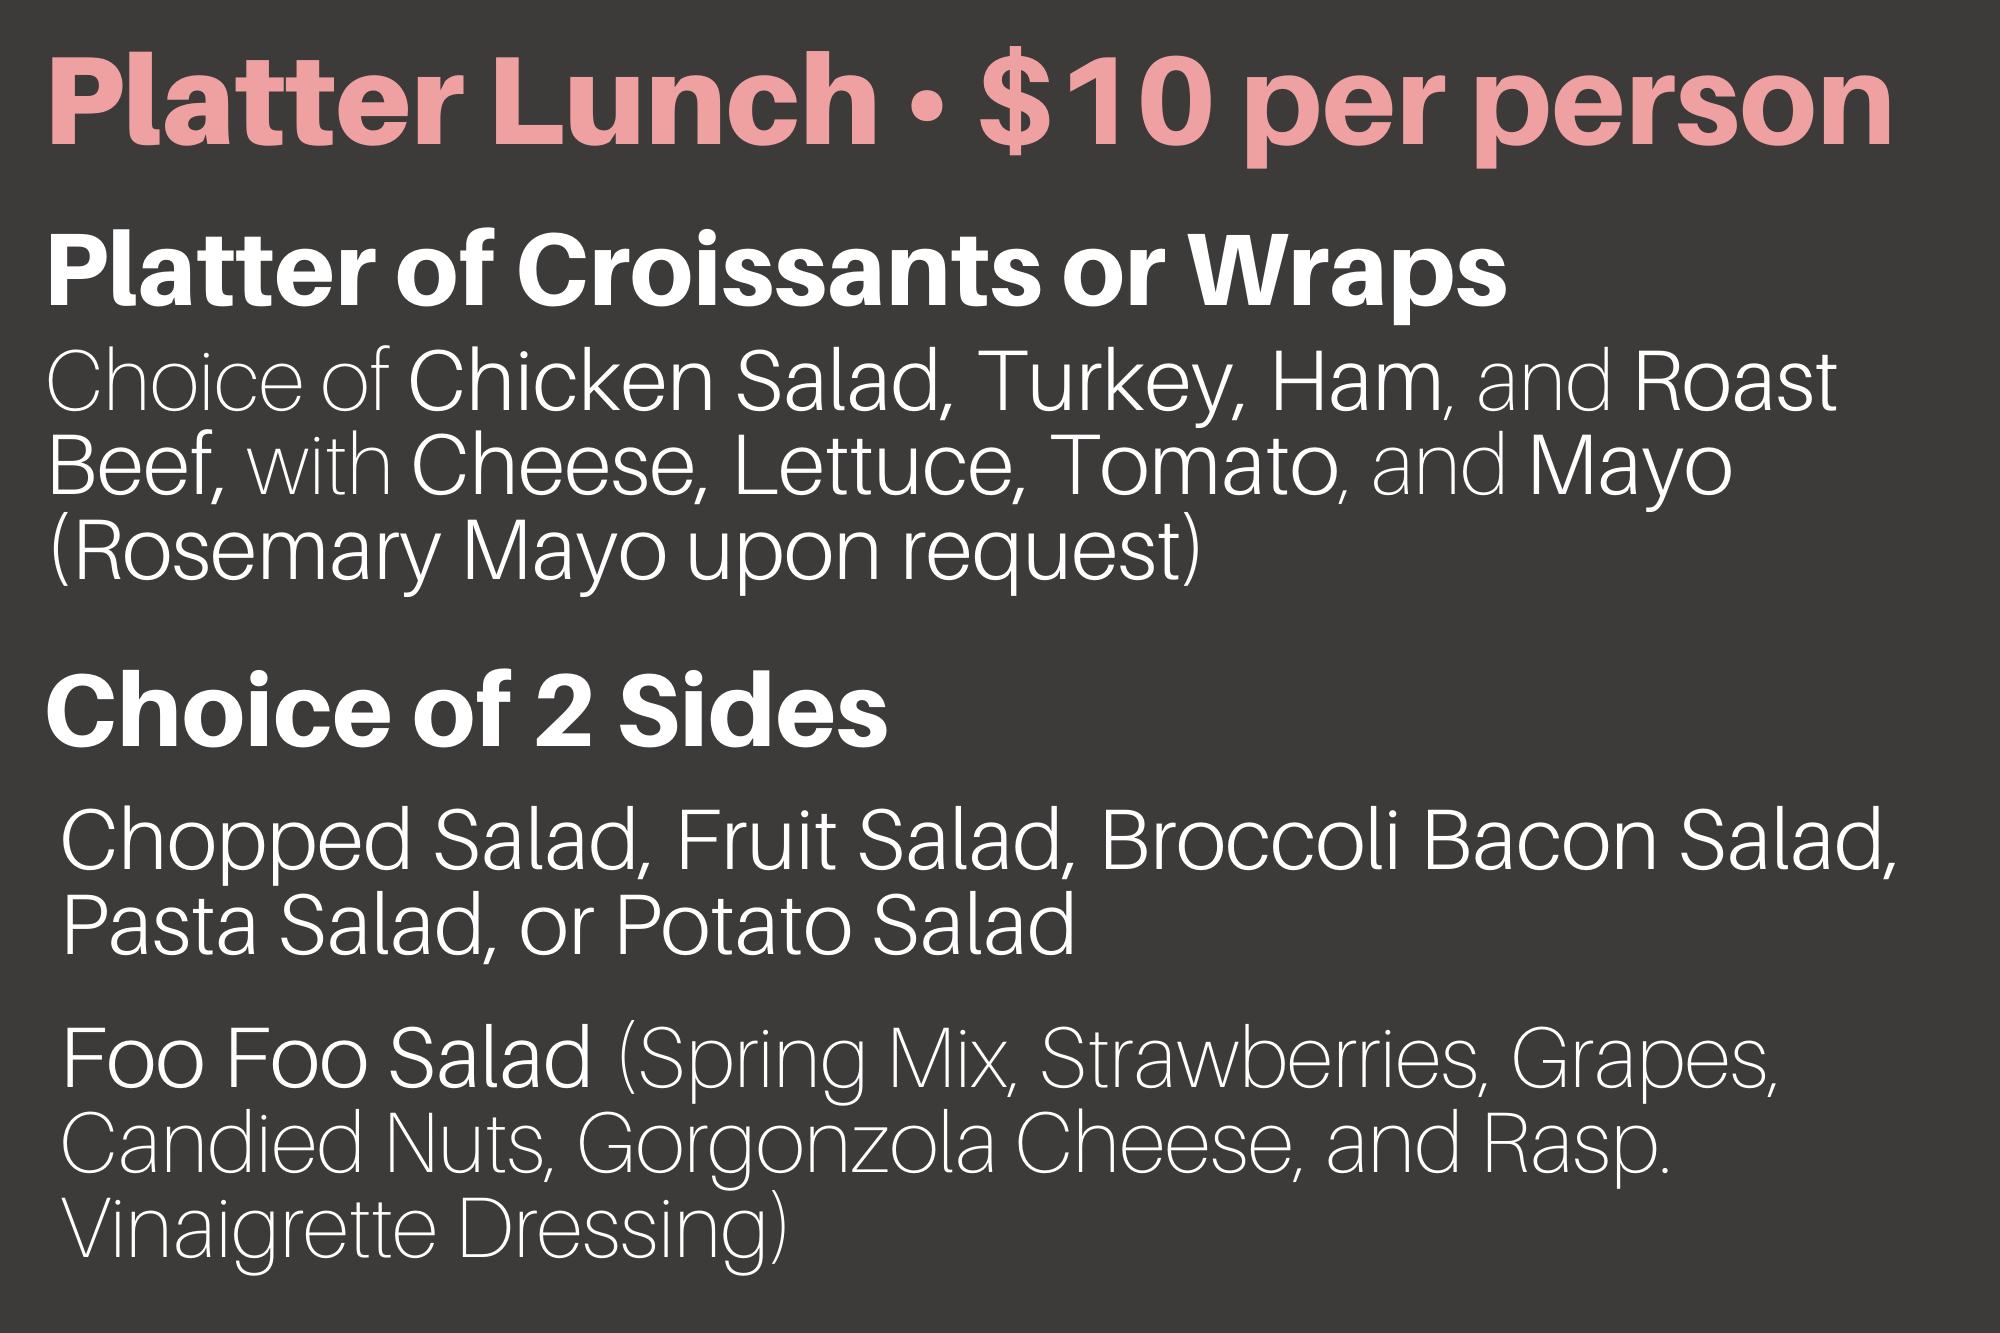 Box Lunch Corporate Catering Options